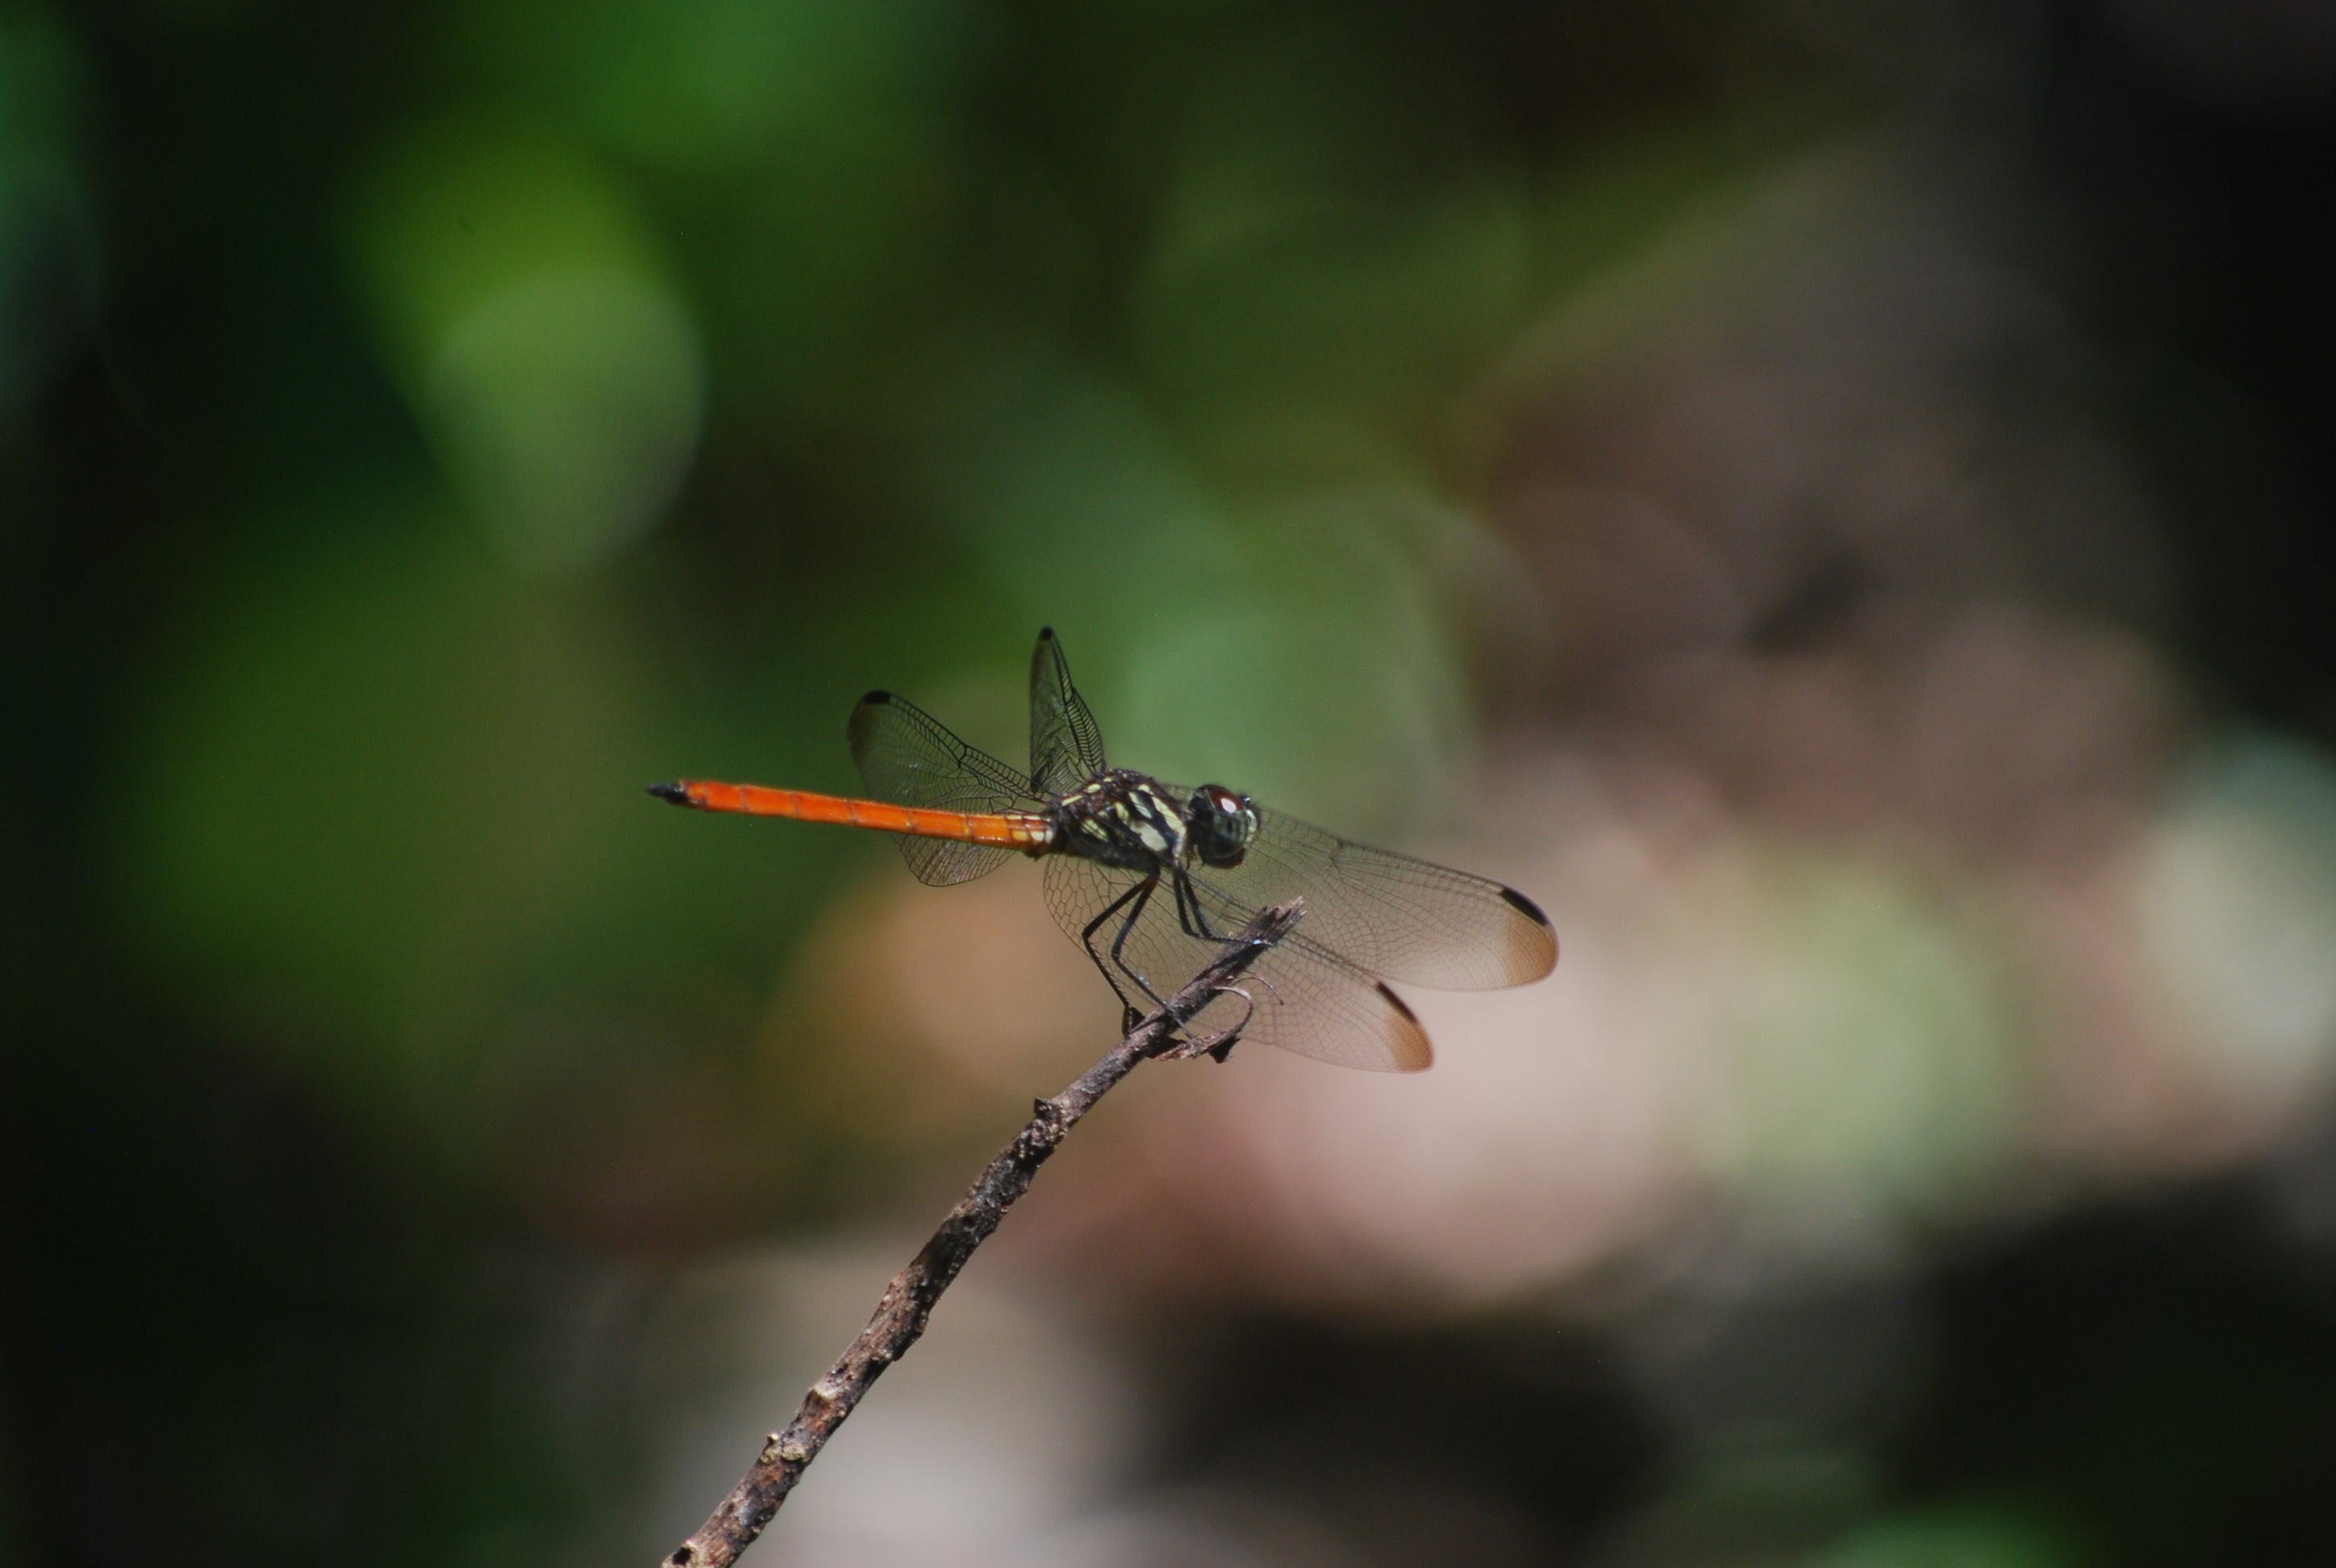 Red bodied dragonfly resting on a branch.